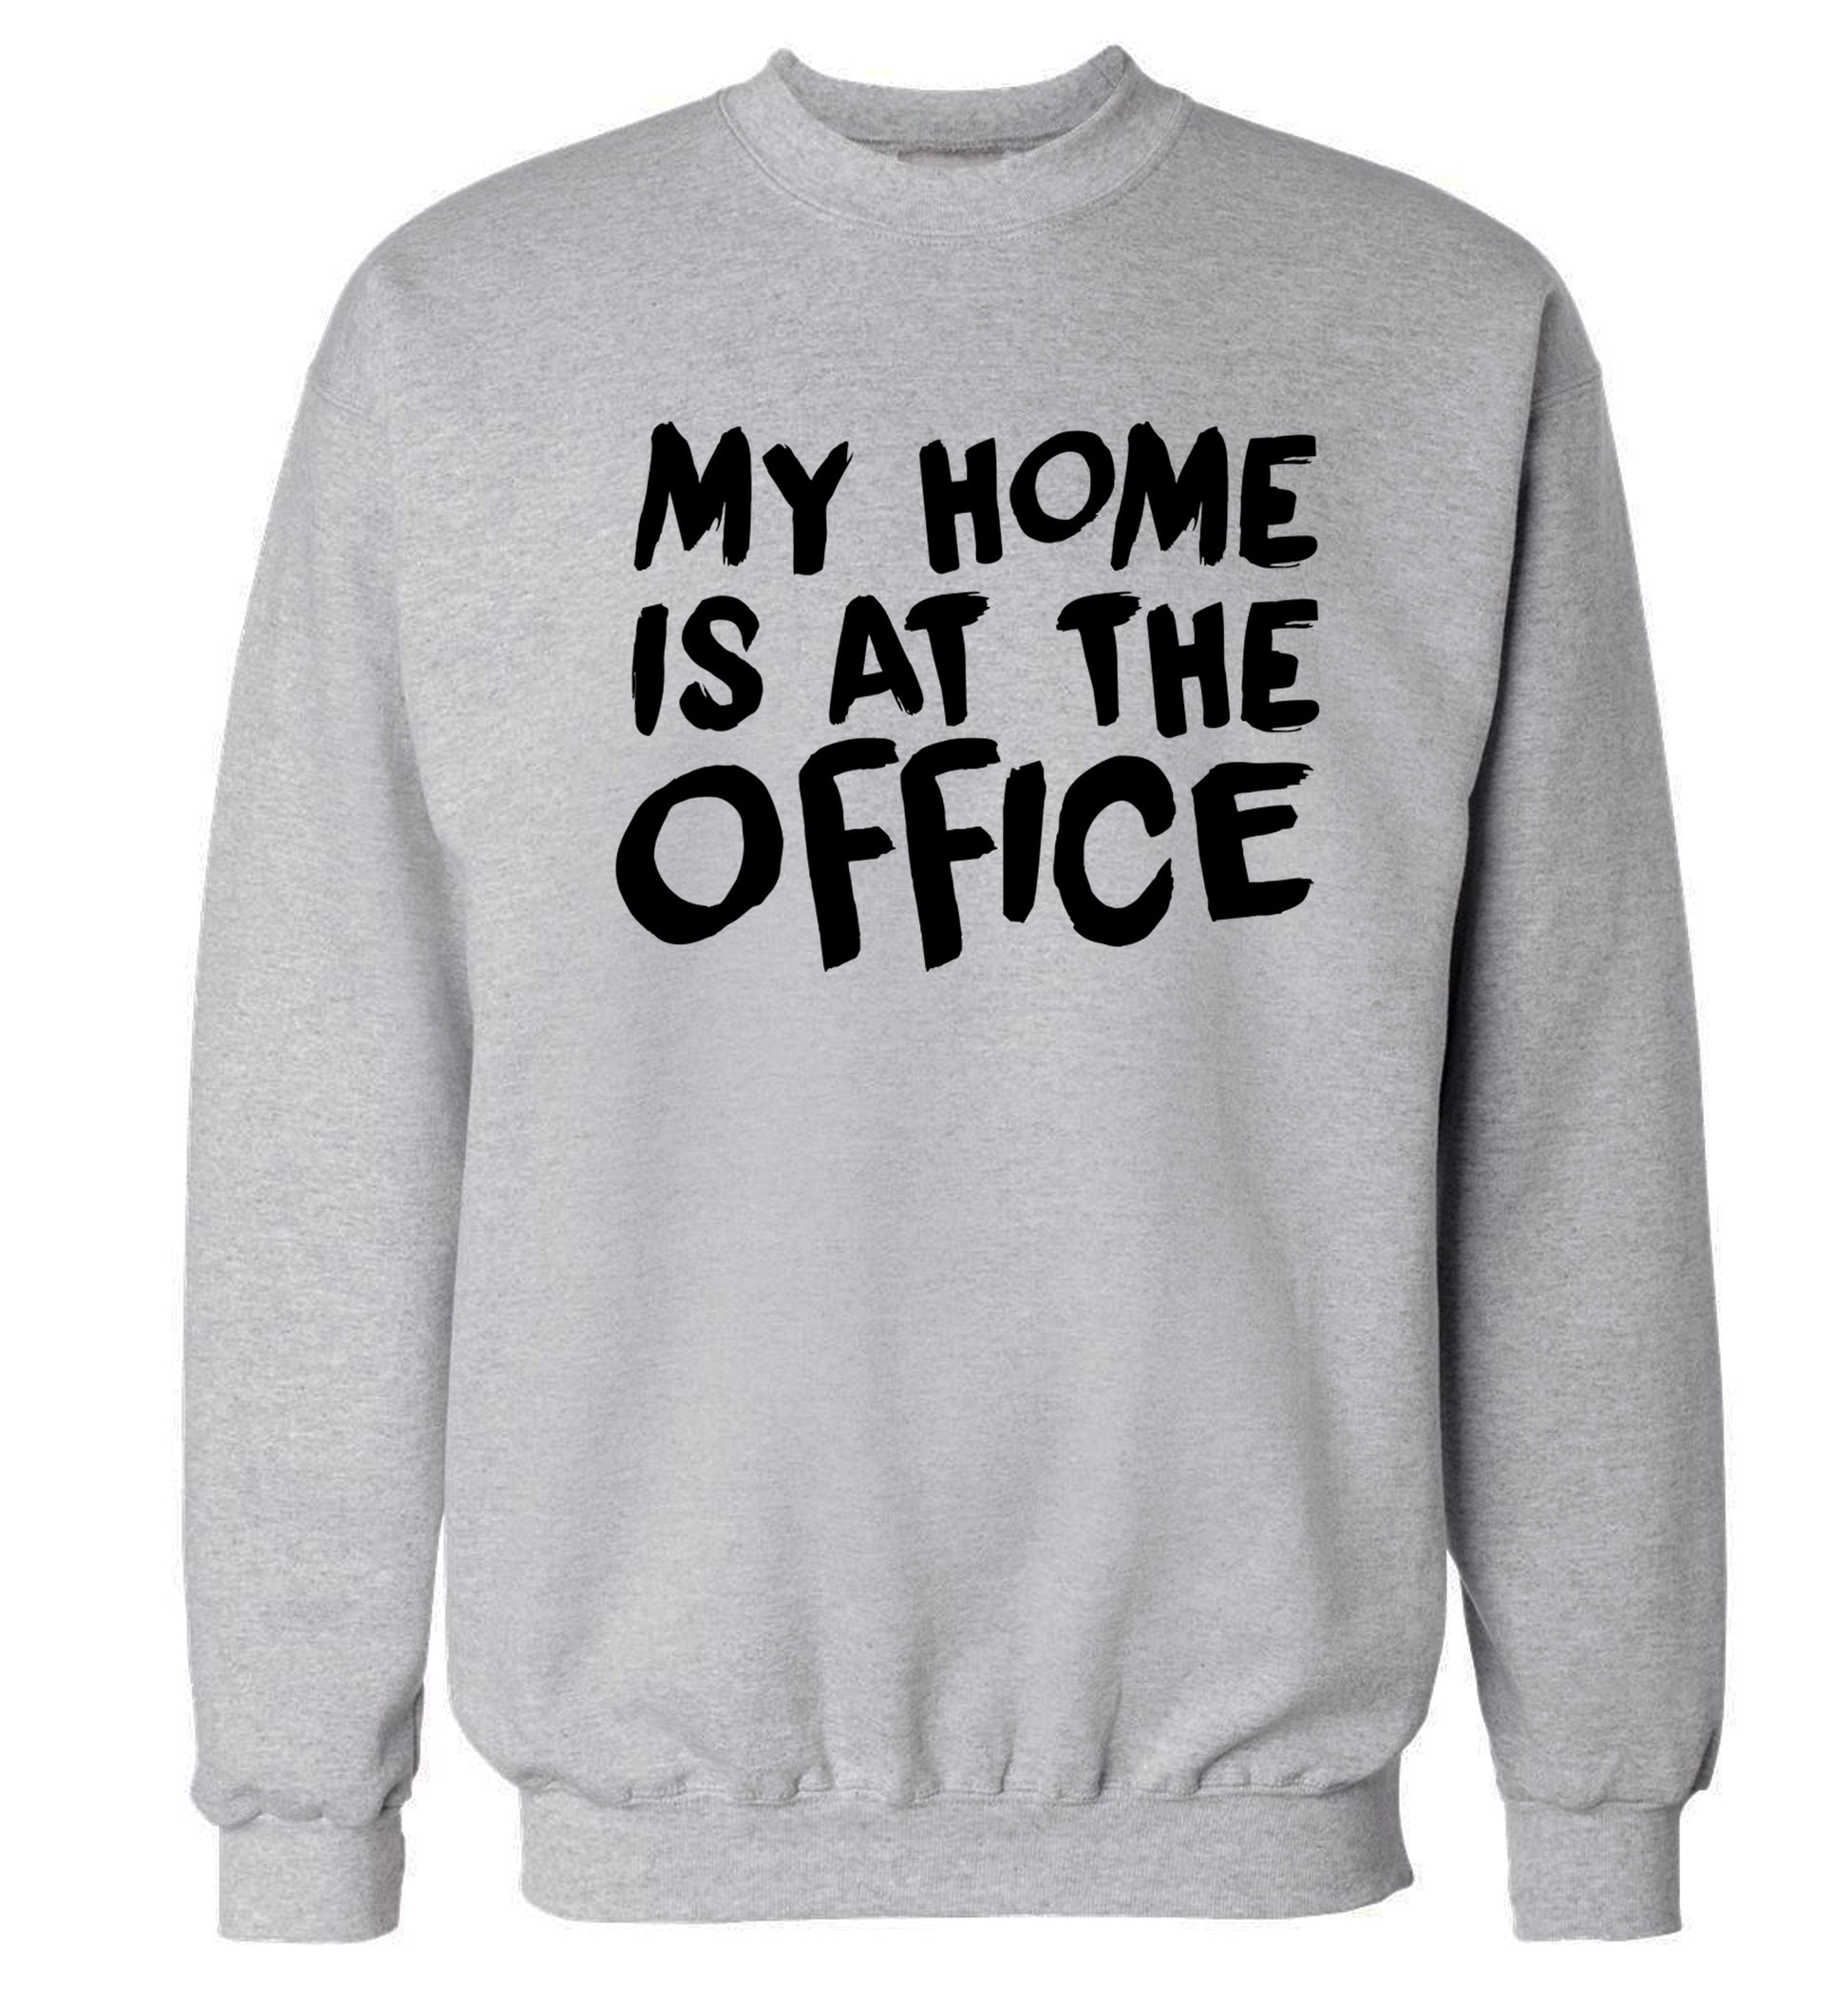 My home is at the office Adult's unisex grey Sweater 2XL